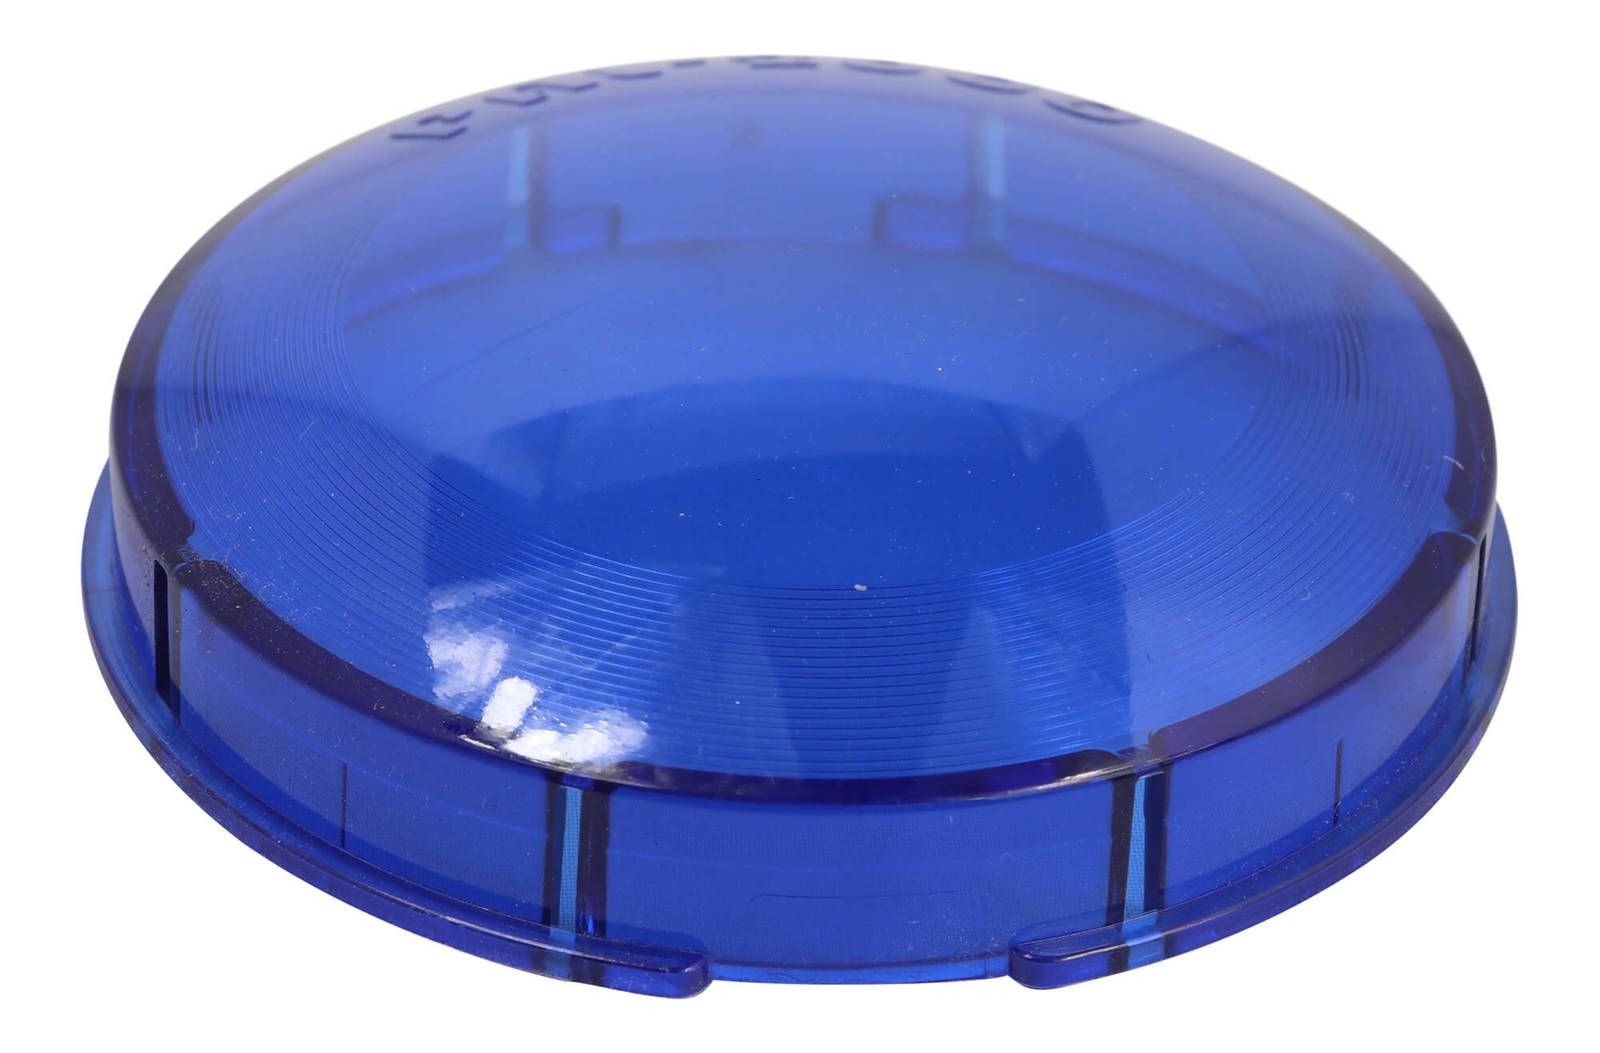 Pal 2000 Blue Lens Cover - Snap on Pool Light Cover For the PAL 2000 Lights